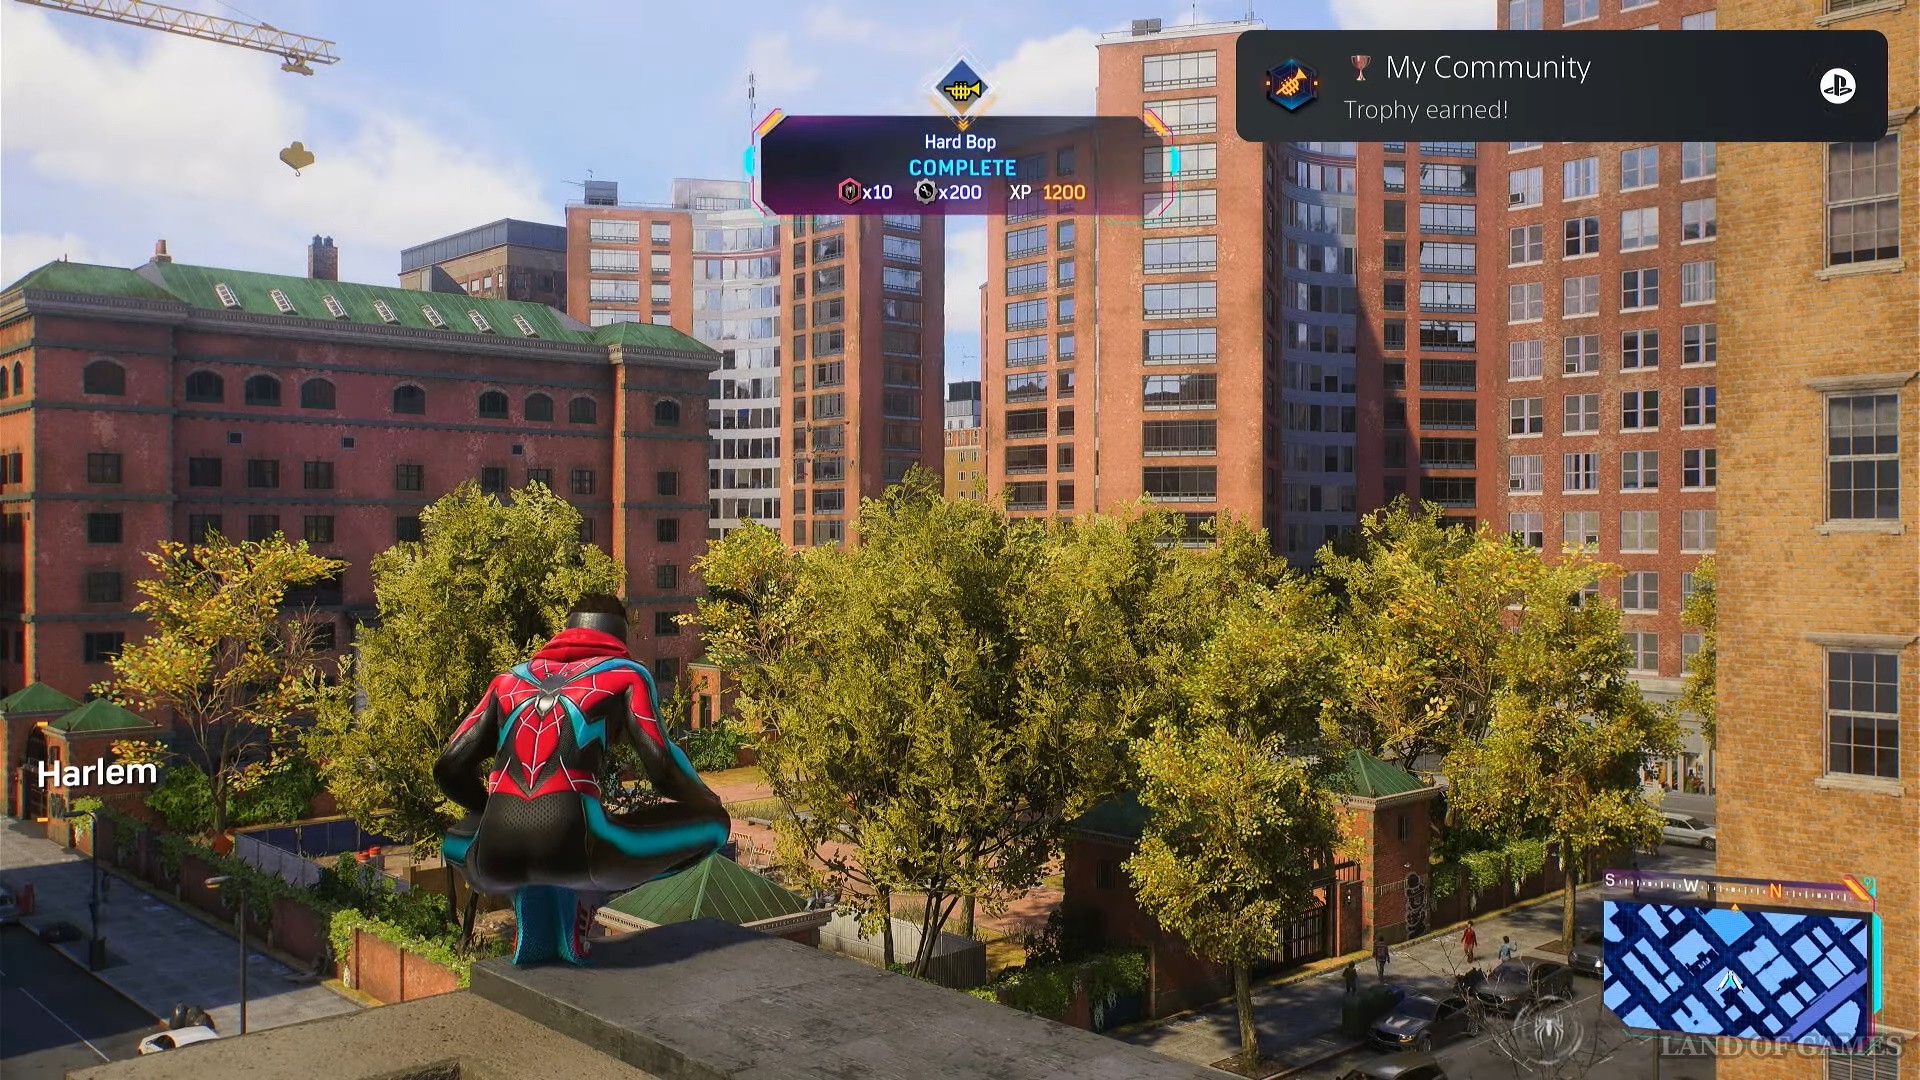 Spider-Man 2: How to complete Hard Bop mission - My Community